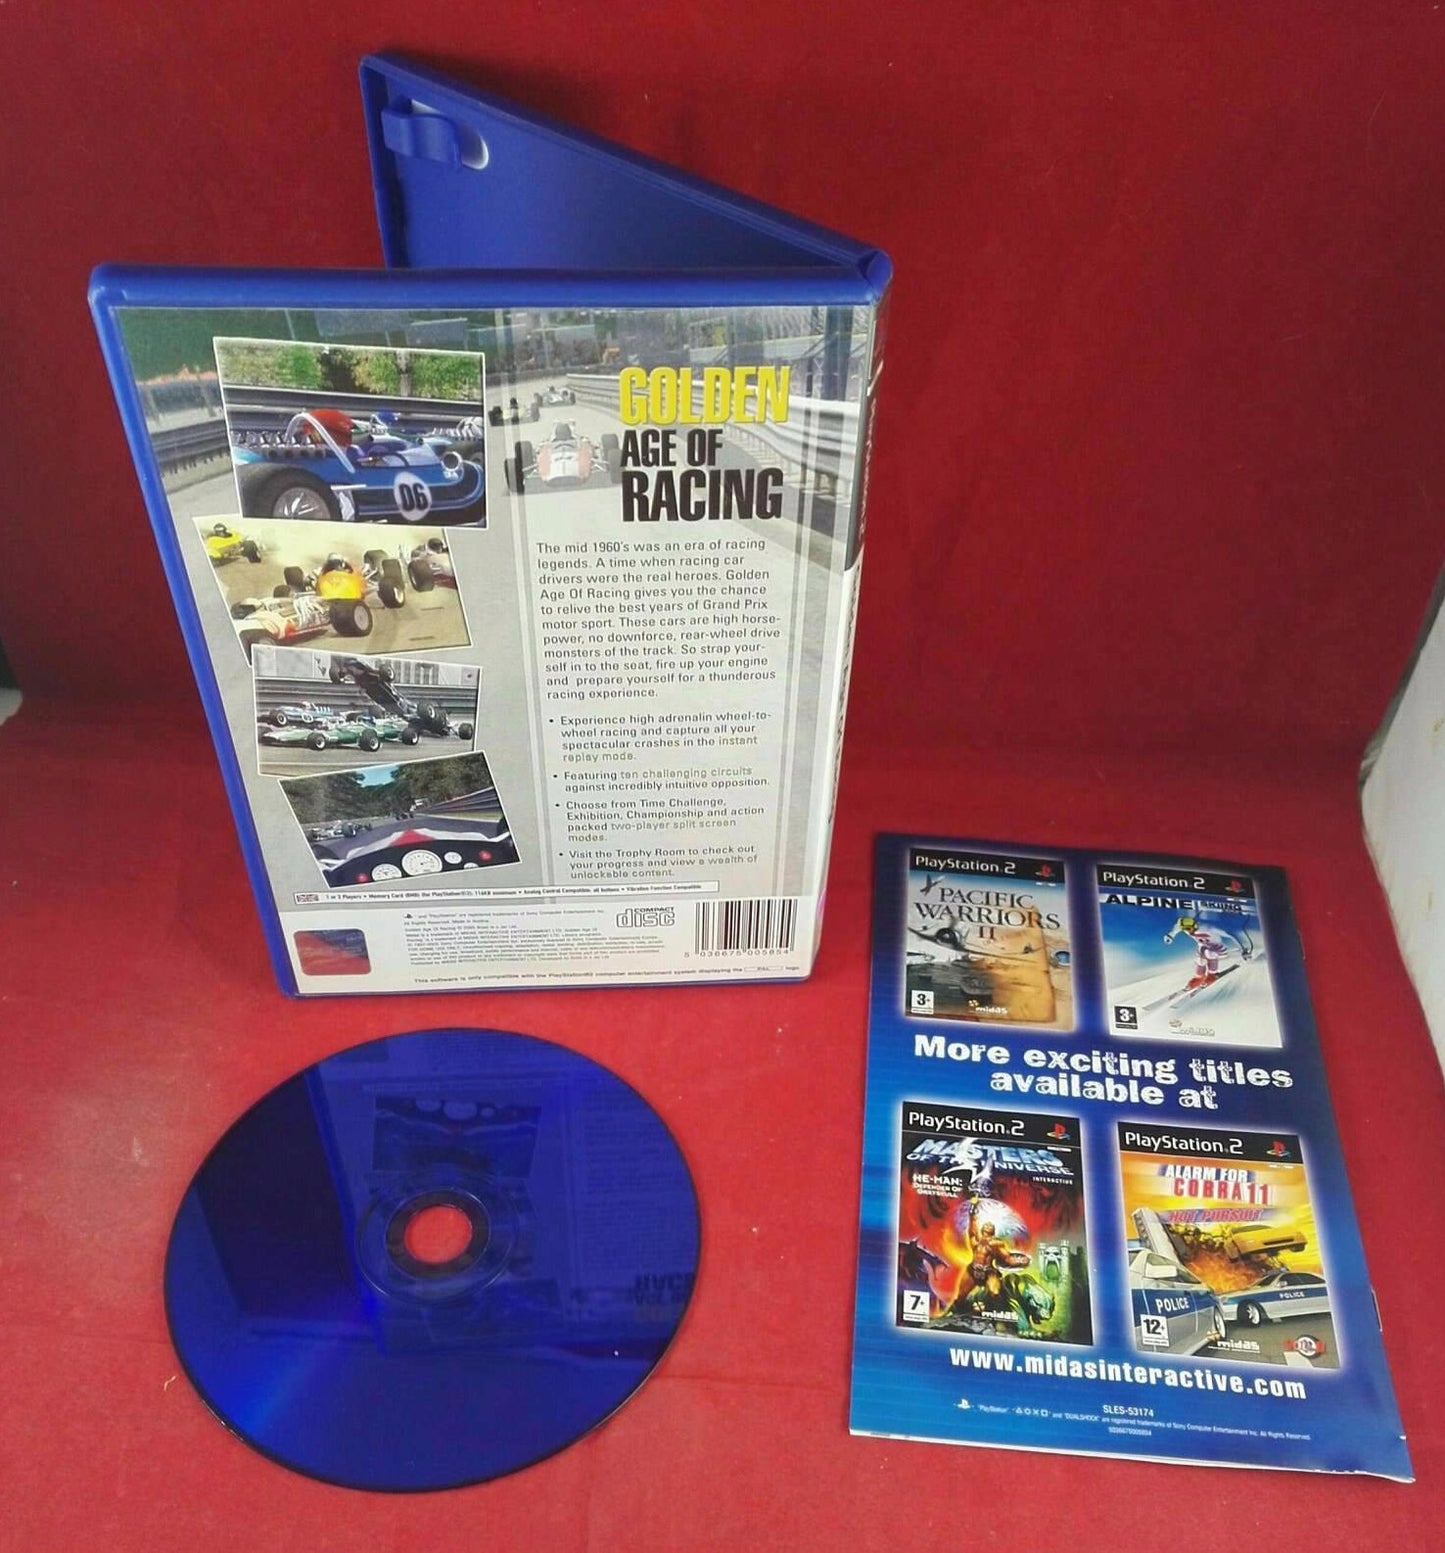 Golden Age of Racing Sony Playstation 2 (PS2) Game